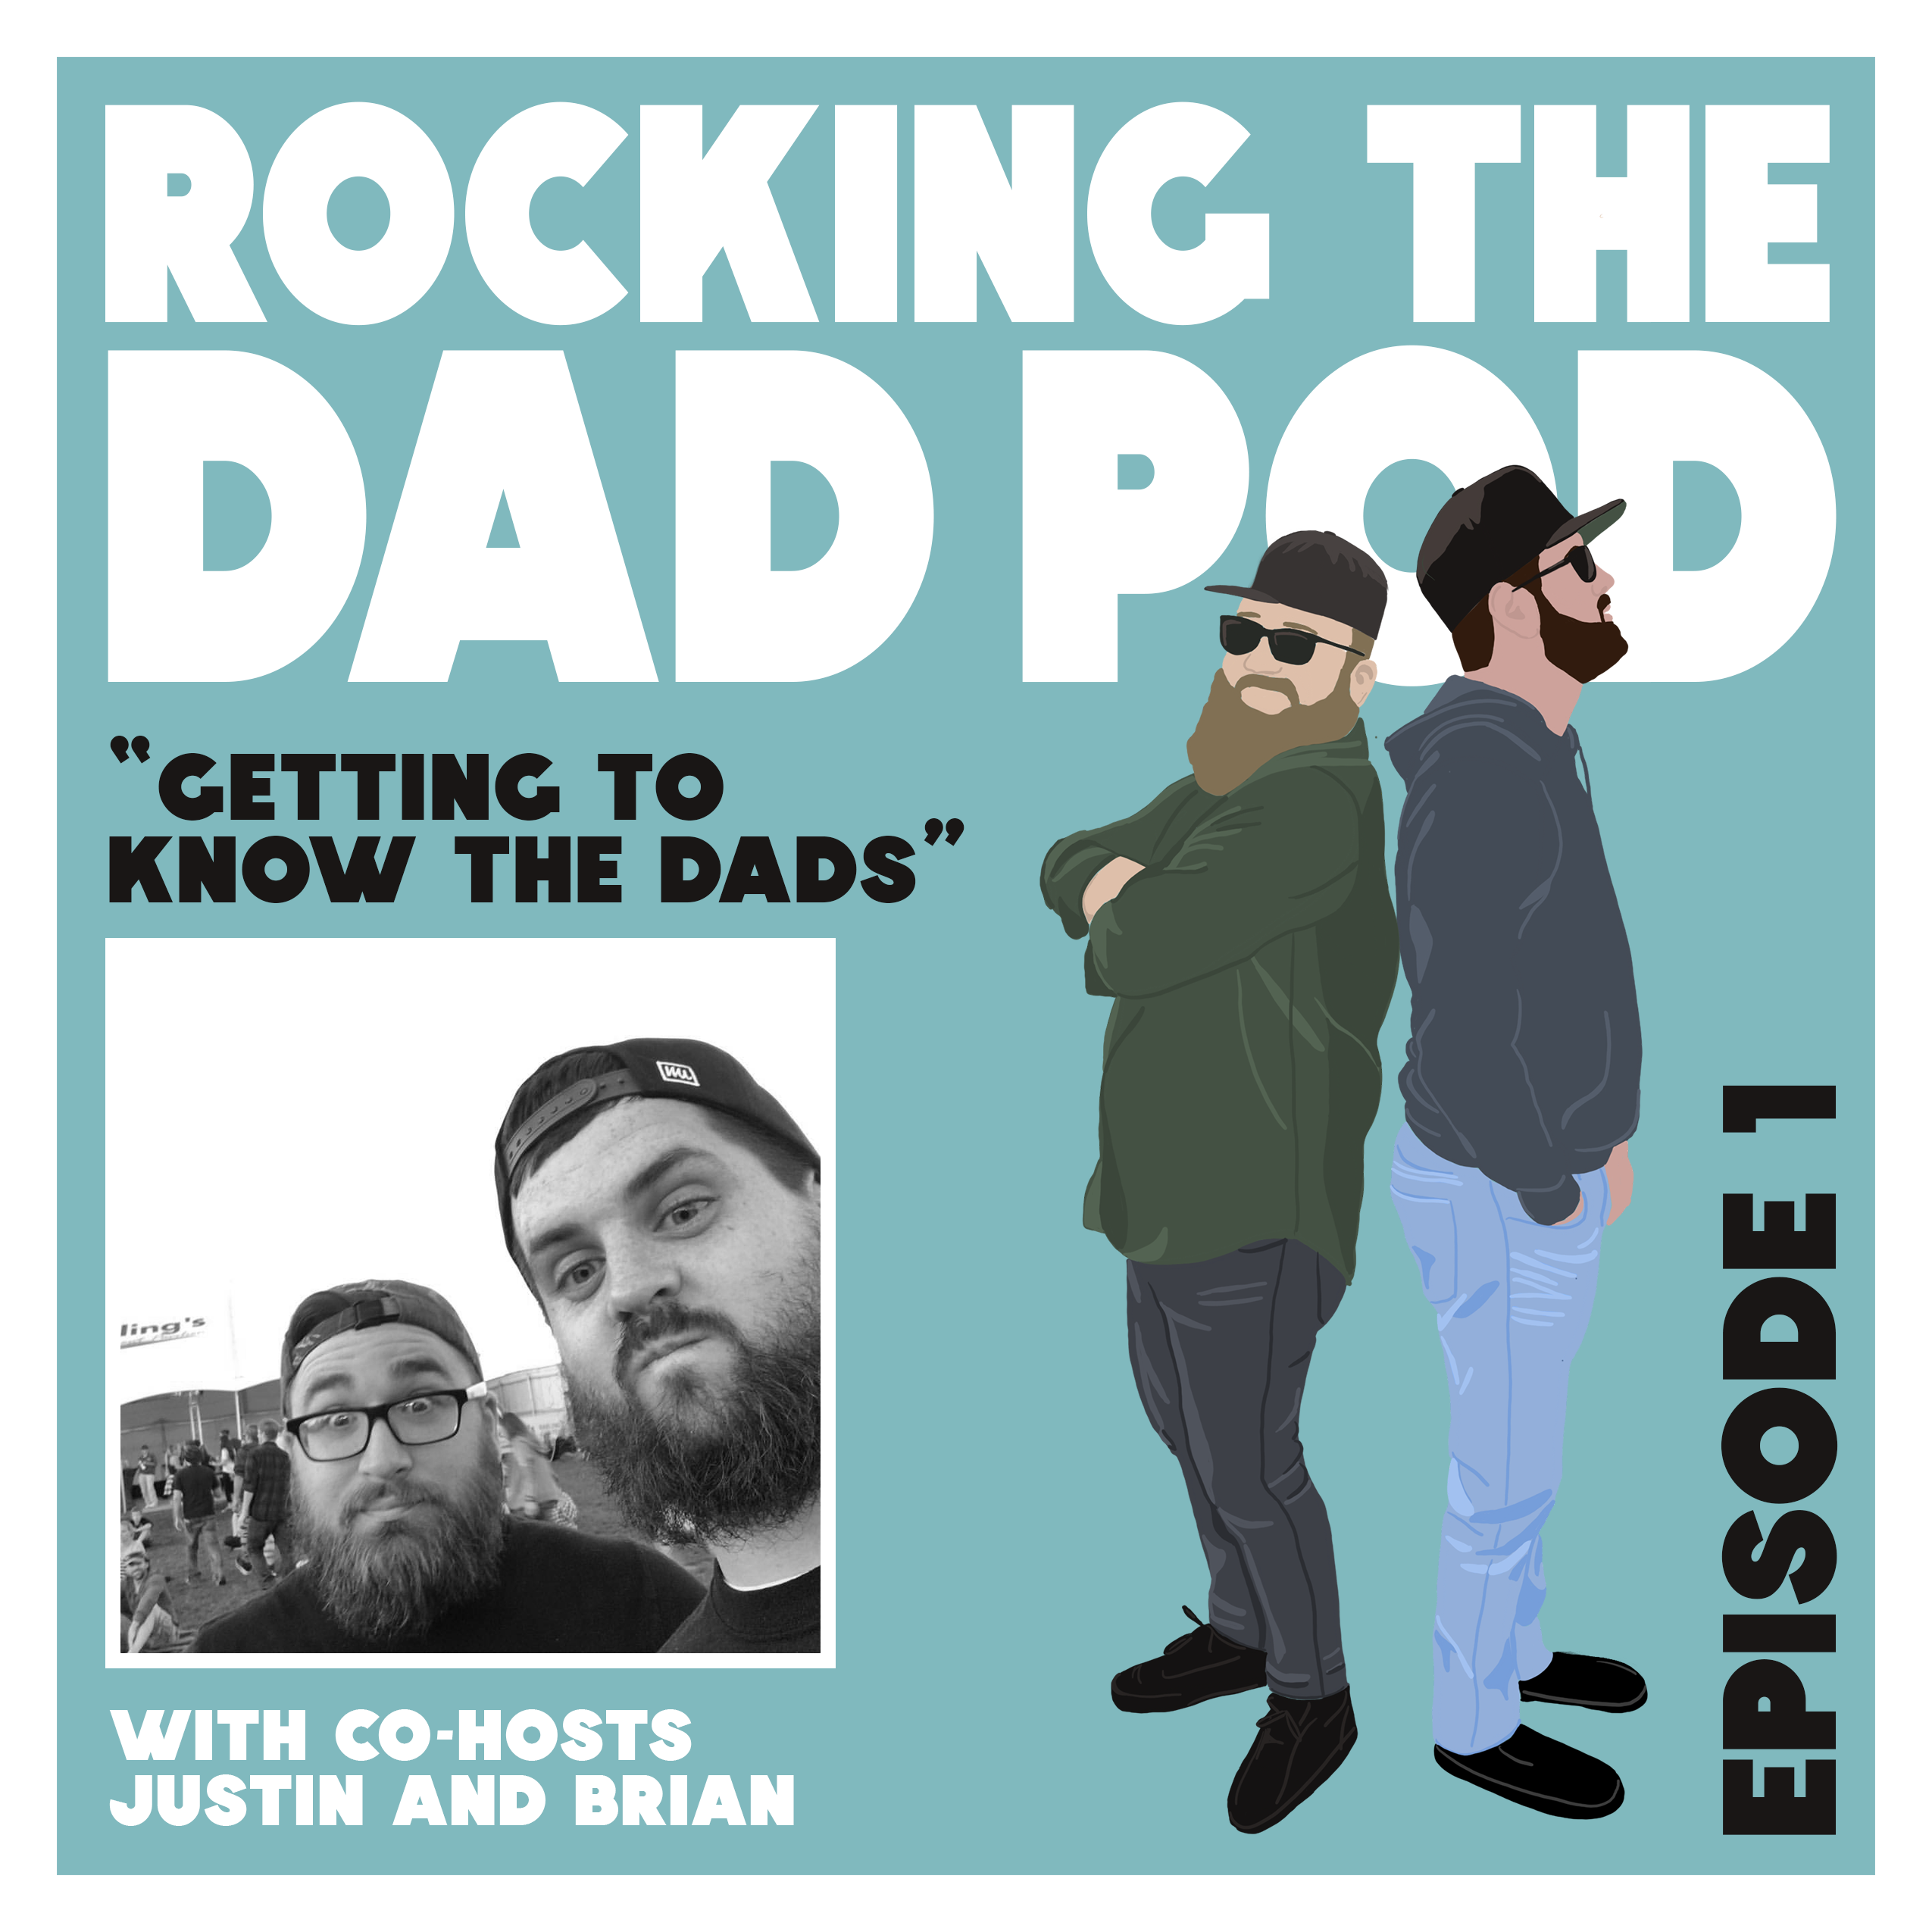 #1: Getting To Know The Dads